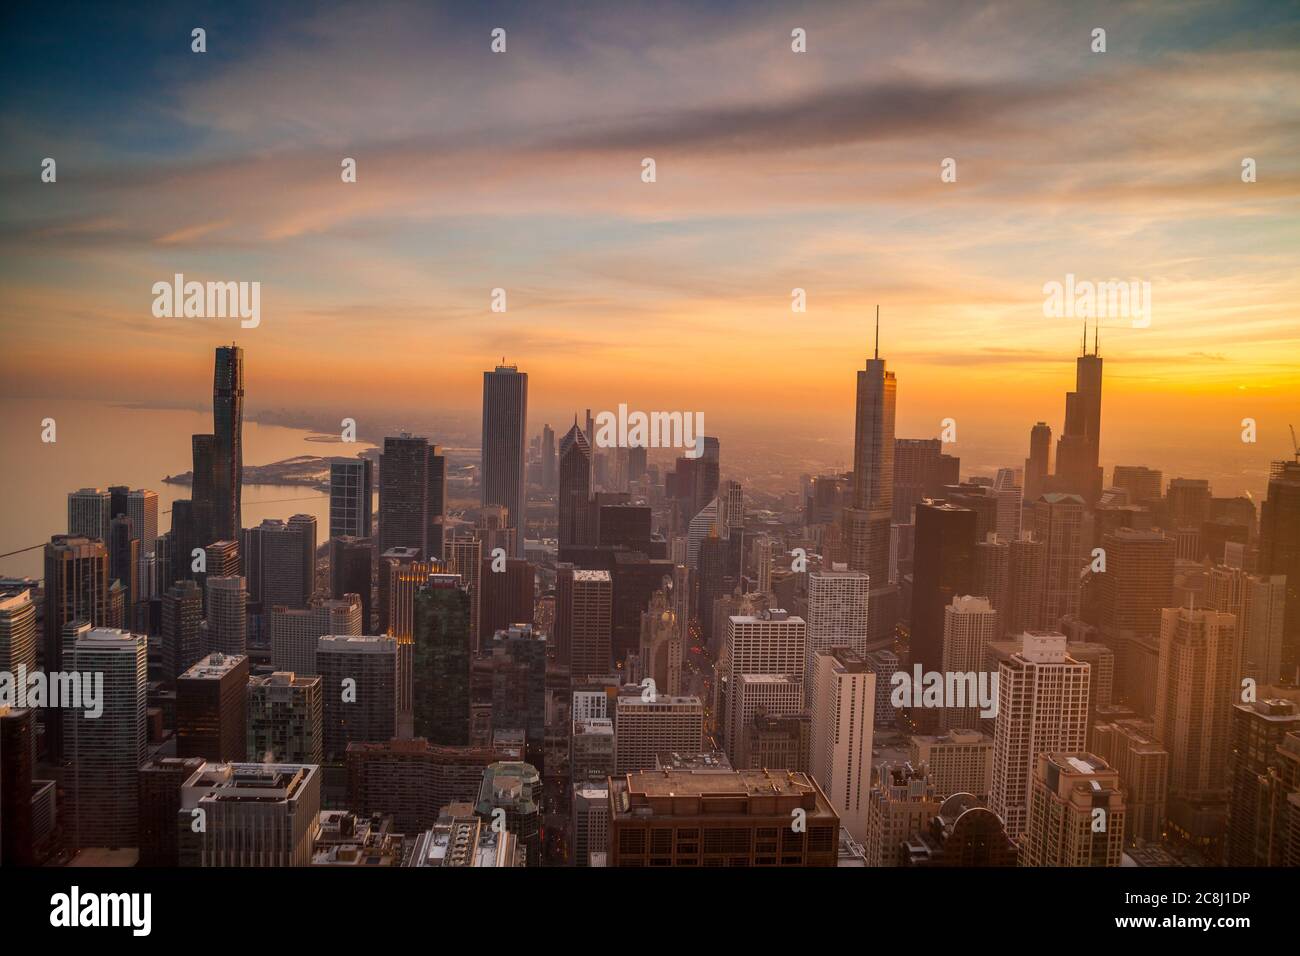 Aerial view of the Chicago skyline just after sinset Stock Photo